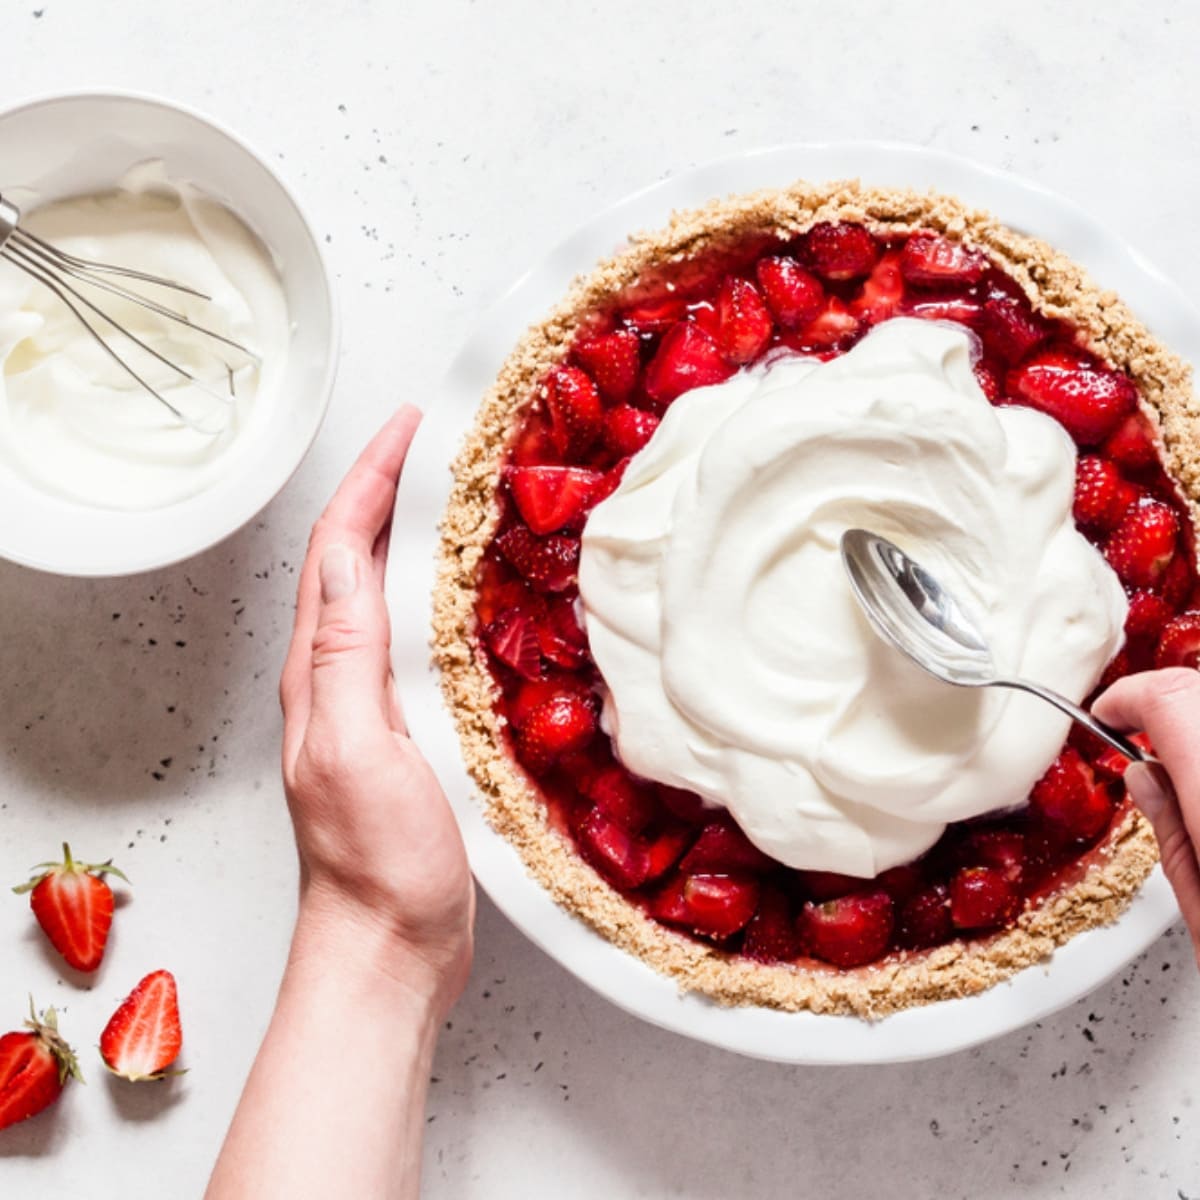 Heavy Cream vs. Heavy Whipping Cream featuring Hands Holding and Spoon Whipped Cream onto Strawberry Pie with a Dish of Whipped Cream to the Side